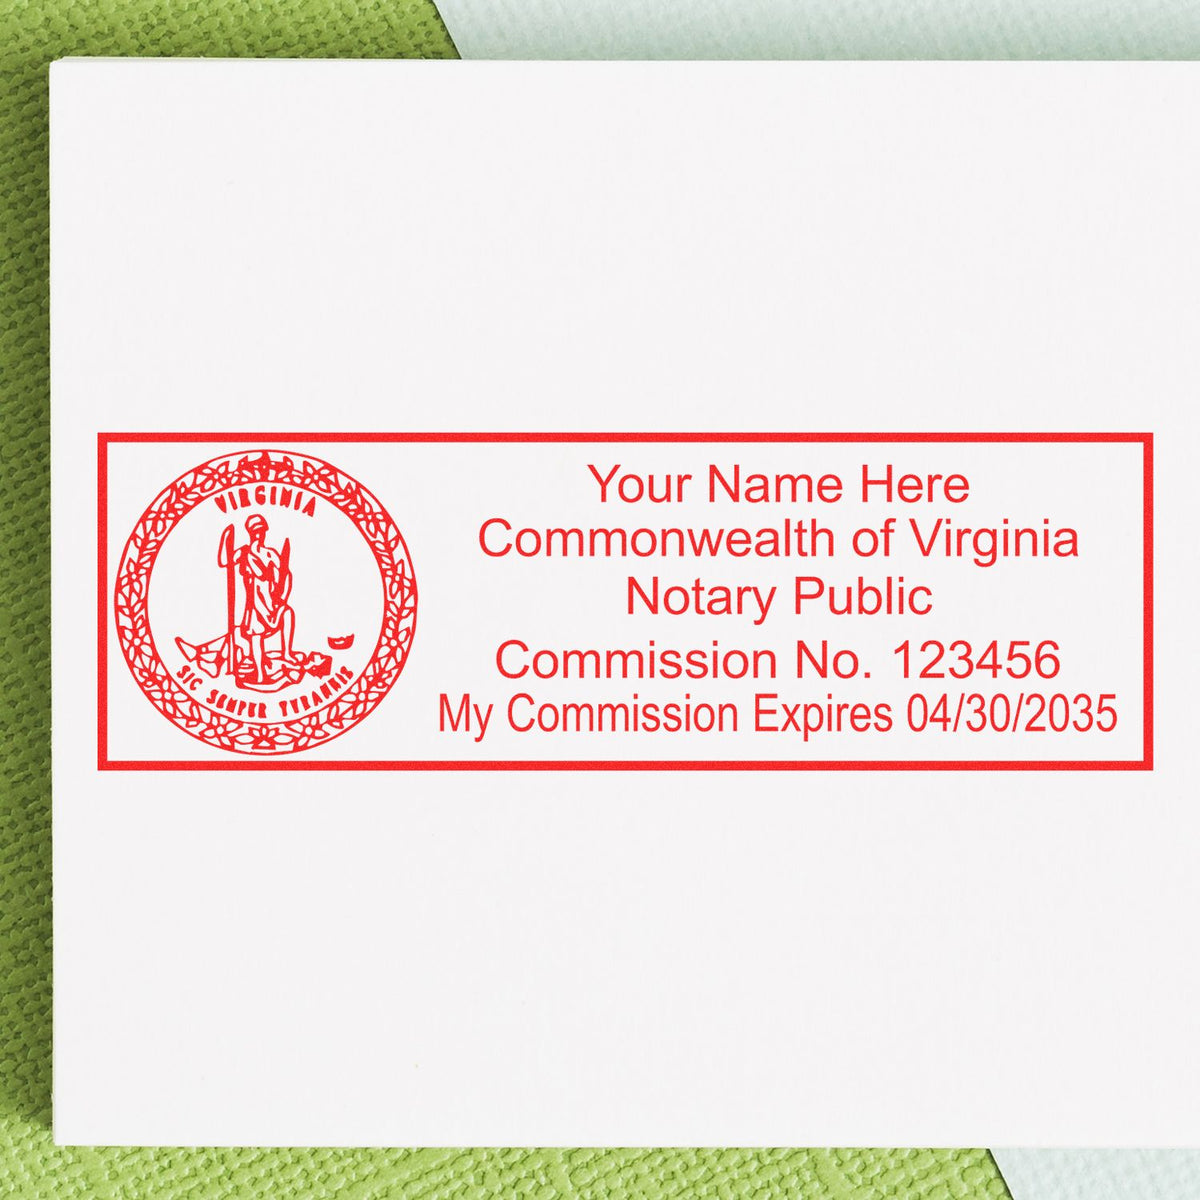 Another Example of a stamped impression of the Super Slim Virginia Notary Public Stamp on a piece of office paper.